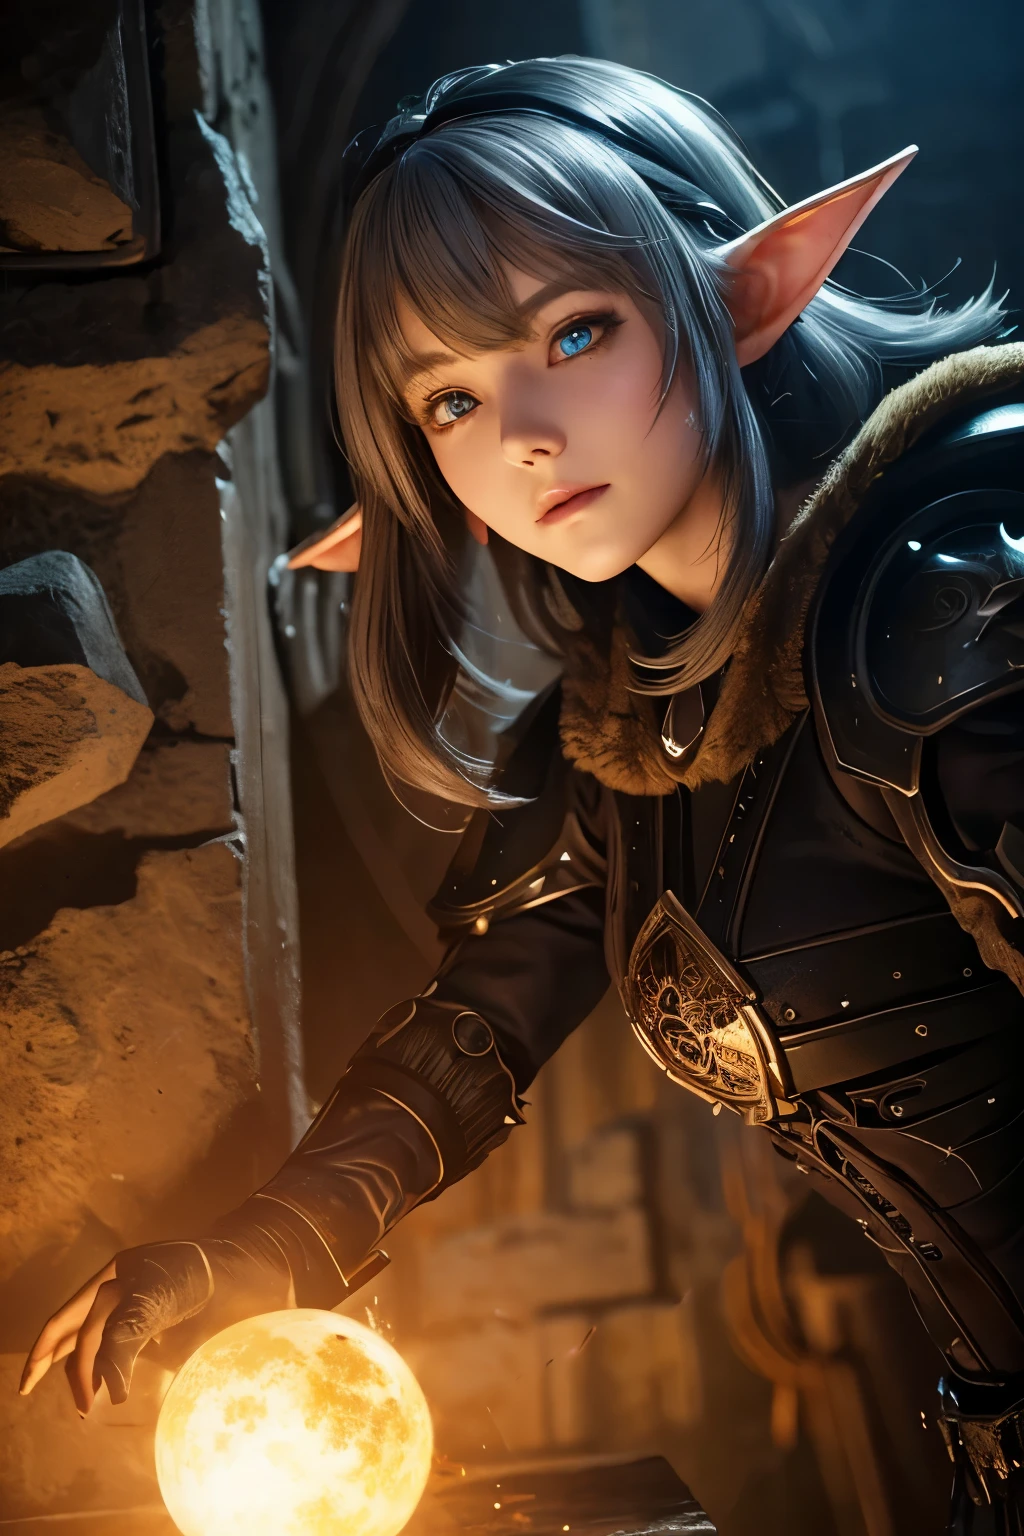 (Ultra-detailed face, looking away), (Fantasy Illustration with Gothic & Ukiyo-e & Comic Art), (A middle-aged dark elf woman with silver hair, blunt bangs, bob cut and dark purple skin, lavender eyes), (She has her goggles shifted to her forehead and is wearing red quilted armor and red boots), BREAK (She is in a dark, abandoned room in a clock tower, her face close to the wall in a daring pose, reaching out and turning a handle in an attempt to solve a puzzle of gears on the wall), BREAK (In the background, we see crumbling clock parts and a snapping, pale, glowing ball floating in the air)